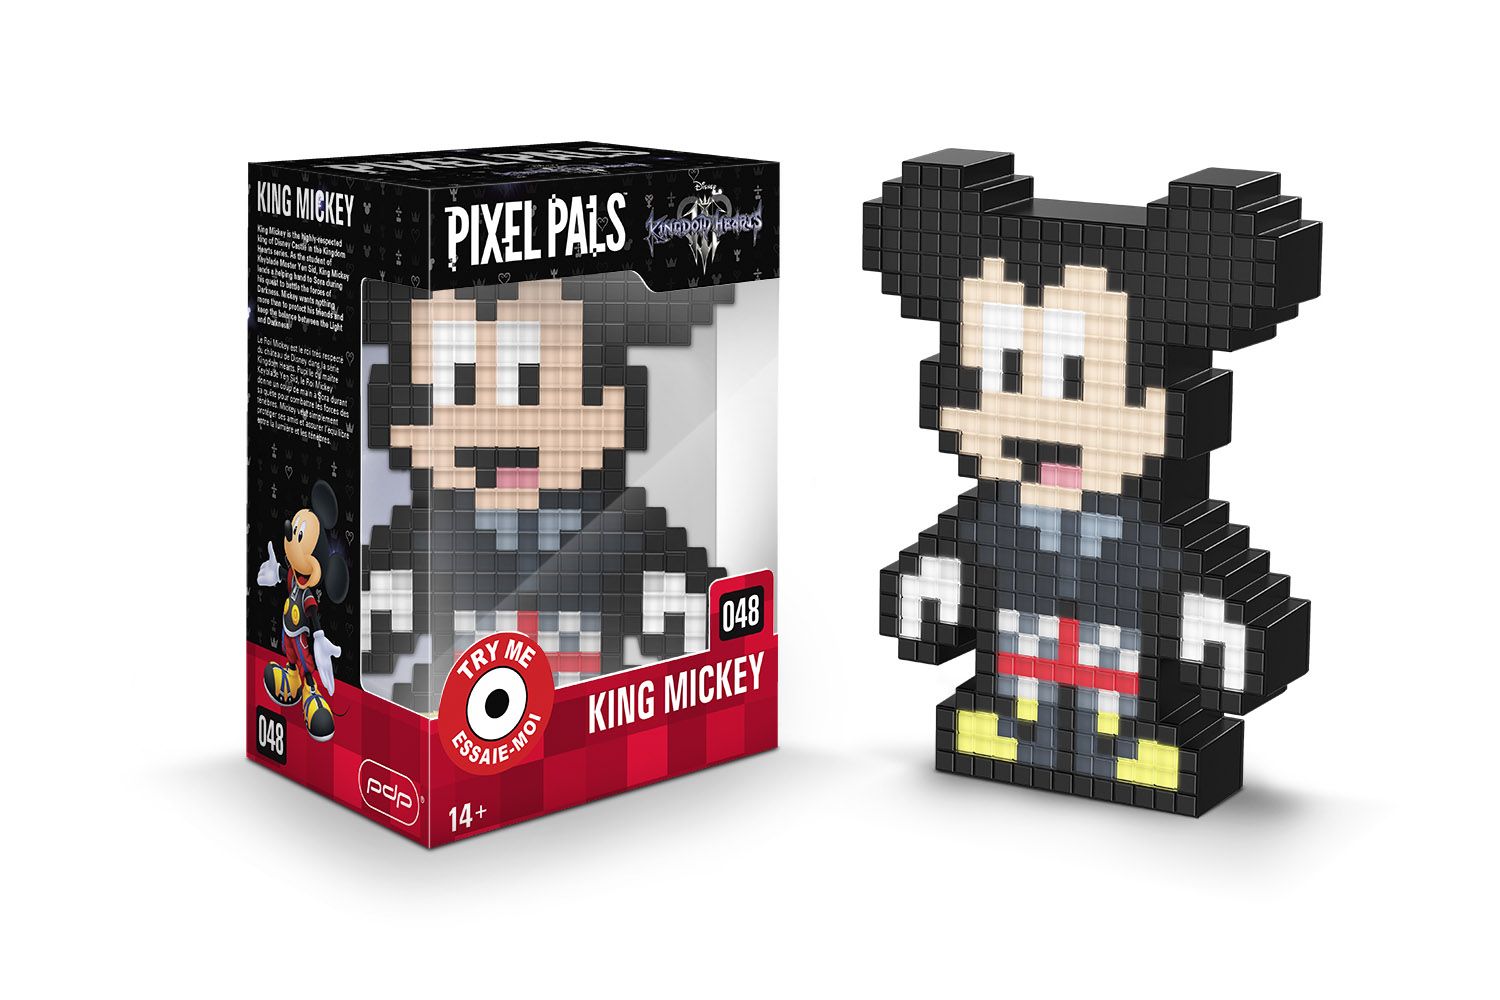 PDPs Pixel Pals Adds New Kingdom Hearts Collectibles